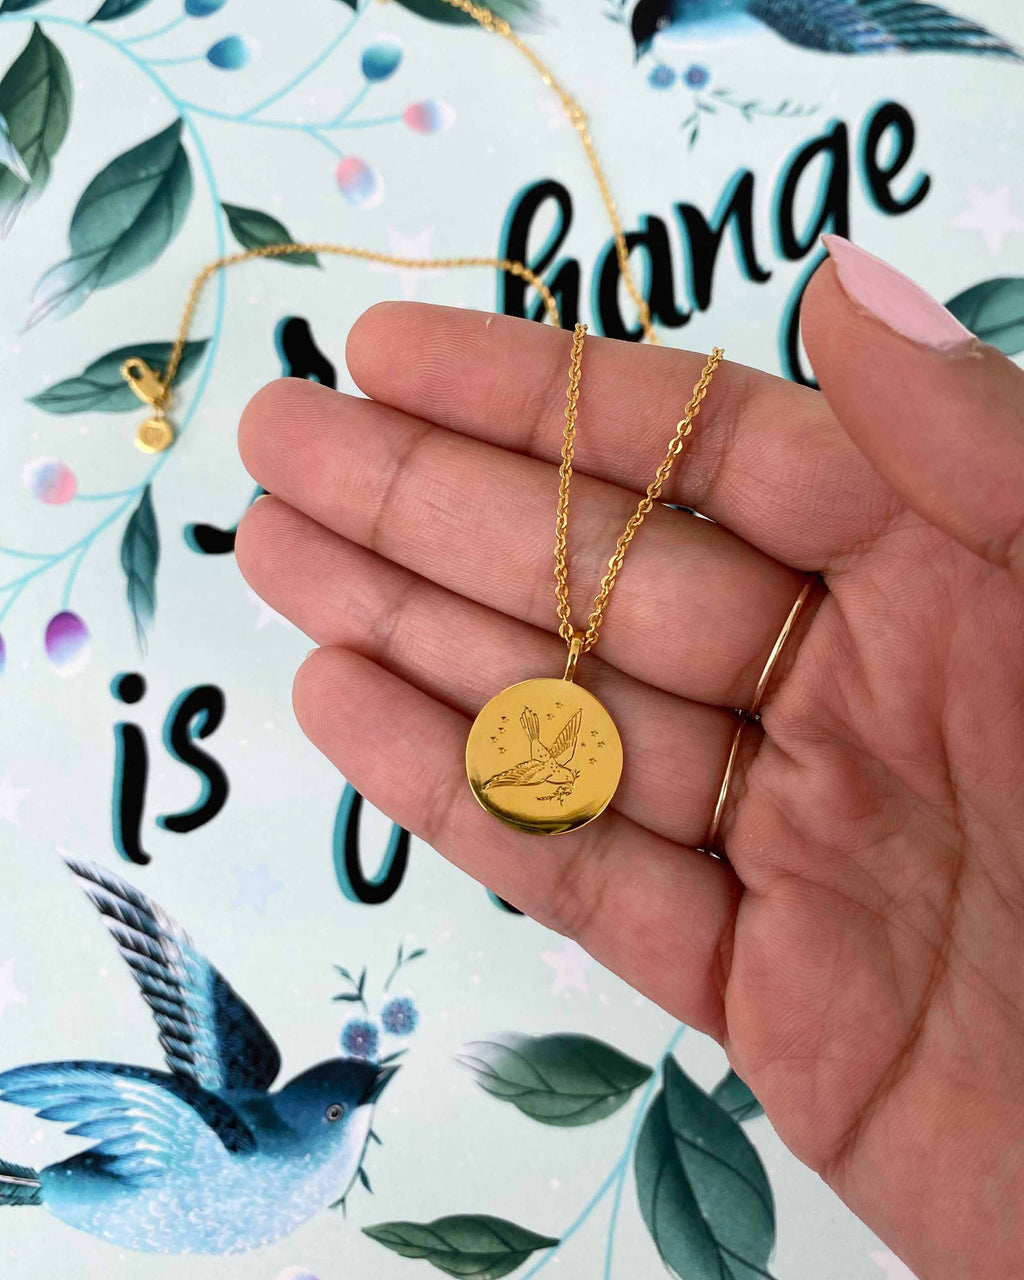 Diane Hill hill gently holds a gold pendant by Carrie Elizabeth Jewellery, featuring a little songbird in flight with a branch in its beak